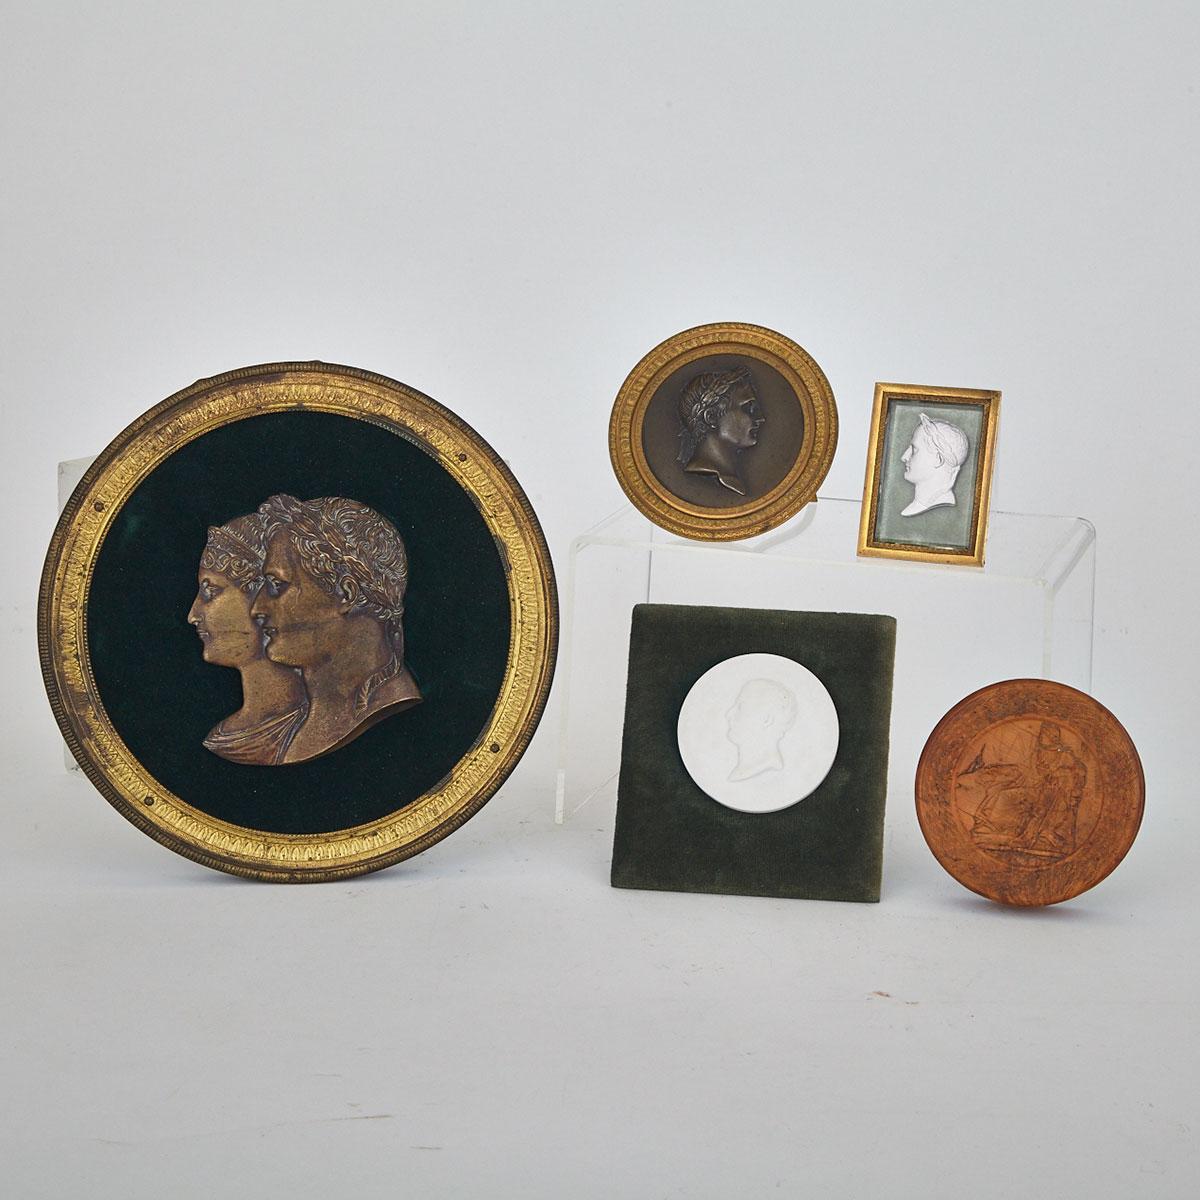 Miscellaneous Group of Napoleonic Related Items, 19th century